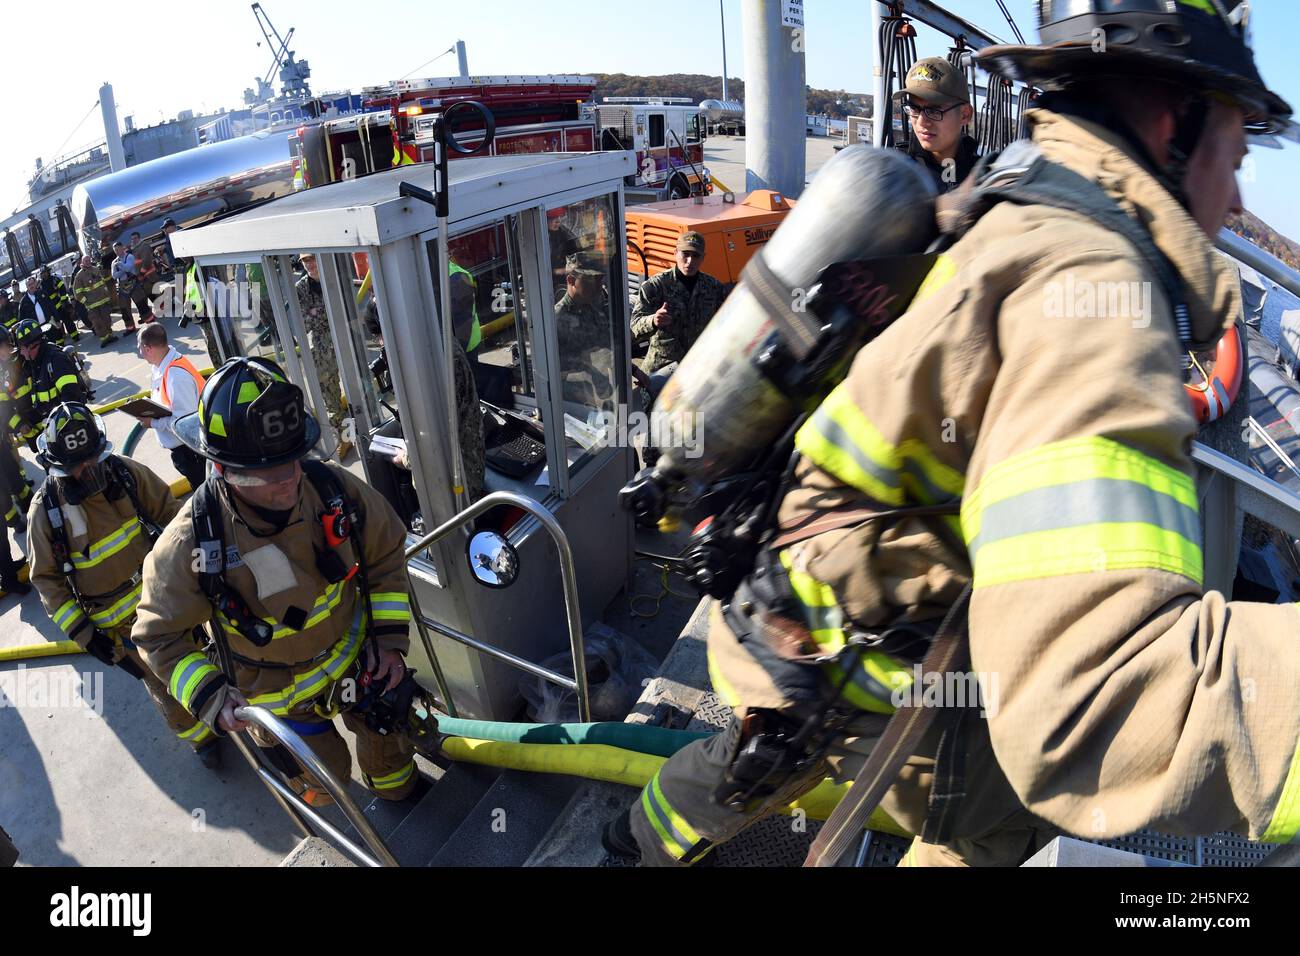 211110-N-GR655-449 GROTON, Conn. (November 10, 2021) – U.S. Navy firefighters cross the bow of the USS Cheyenne (SSN 773) during a large-scale fire response exercise on board Naval Submarine Base New London in Groton, Conn., Nov. 10, 2021. The exercise, hosted by Naval Submarine Support Facility (NSSF) New London, Cheyenne, and base leadership, offered more than a dozen regional firefighter and first responder organizations the opportunity to experience shipboard firefighting and Navy best practices. (U.S. Navy photo by Chief Petty Officer Joshua Karsten/RELEASED) Stock Photo